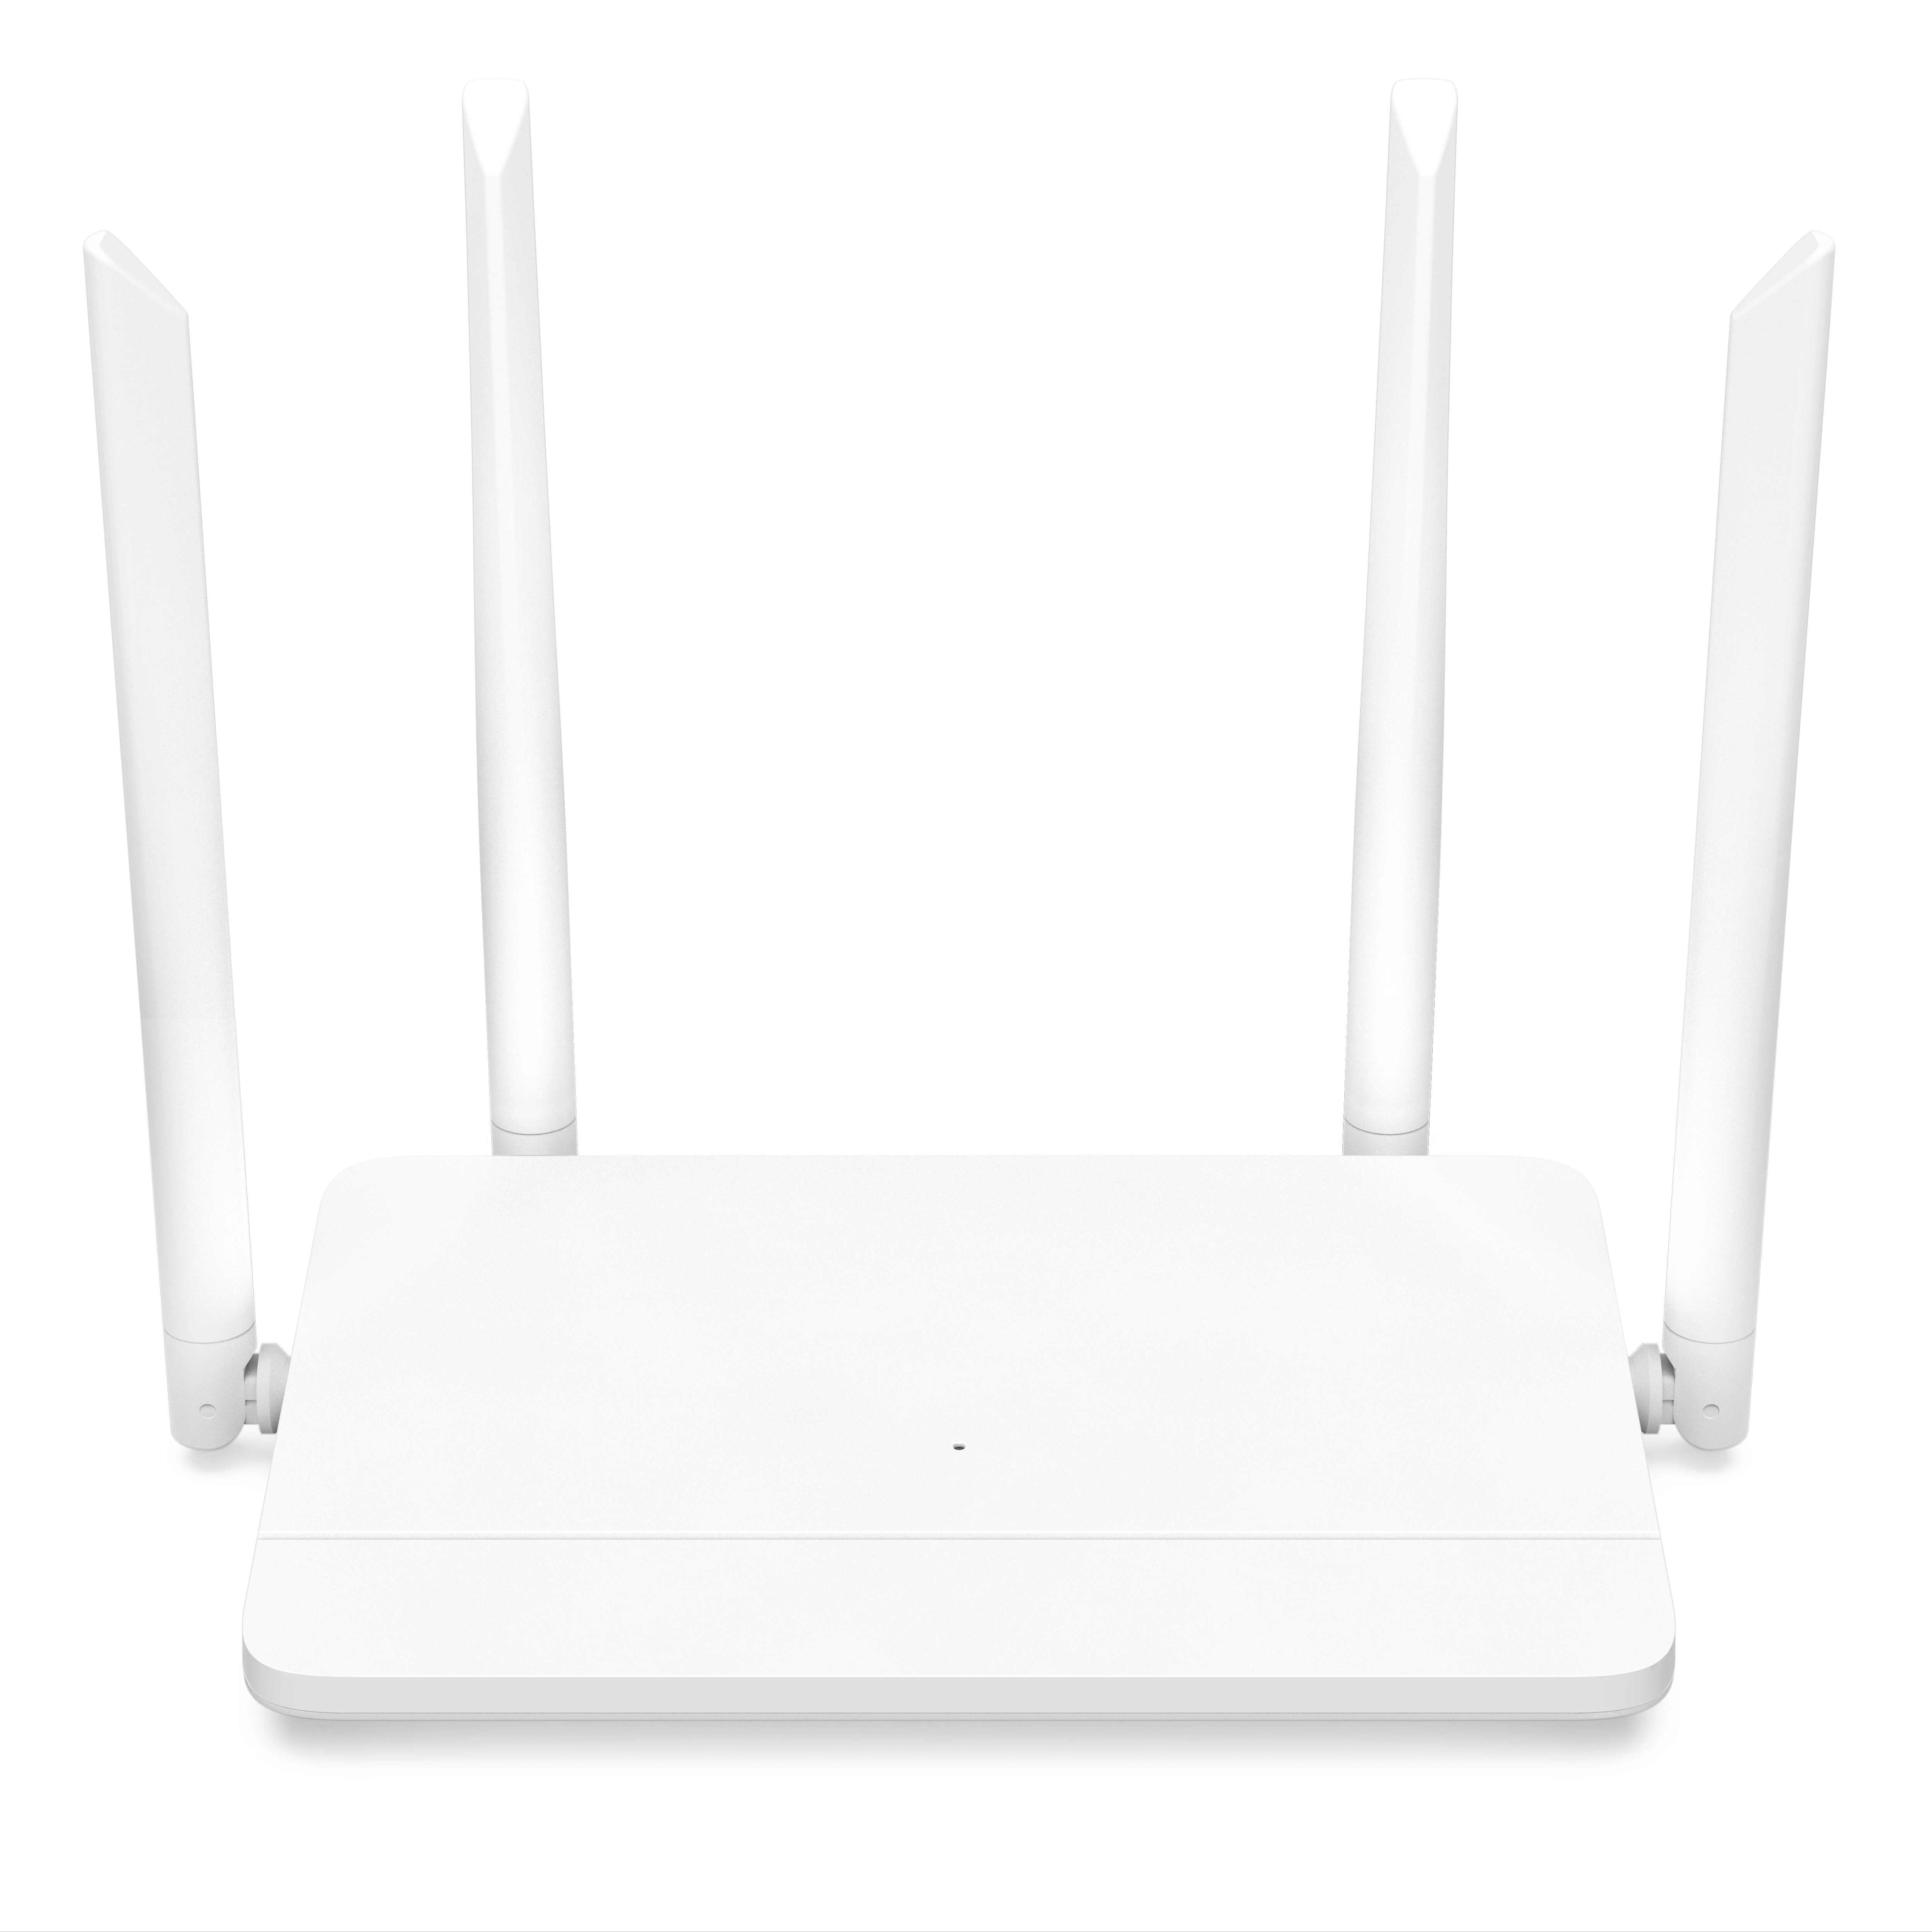 AC1200 AIoT wifi router 1200Mbps Dual-Band Gigabit repeater wifi routers wireless router with 4*5dBi External Antennas